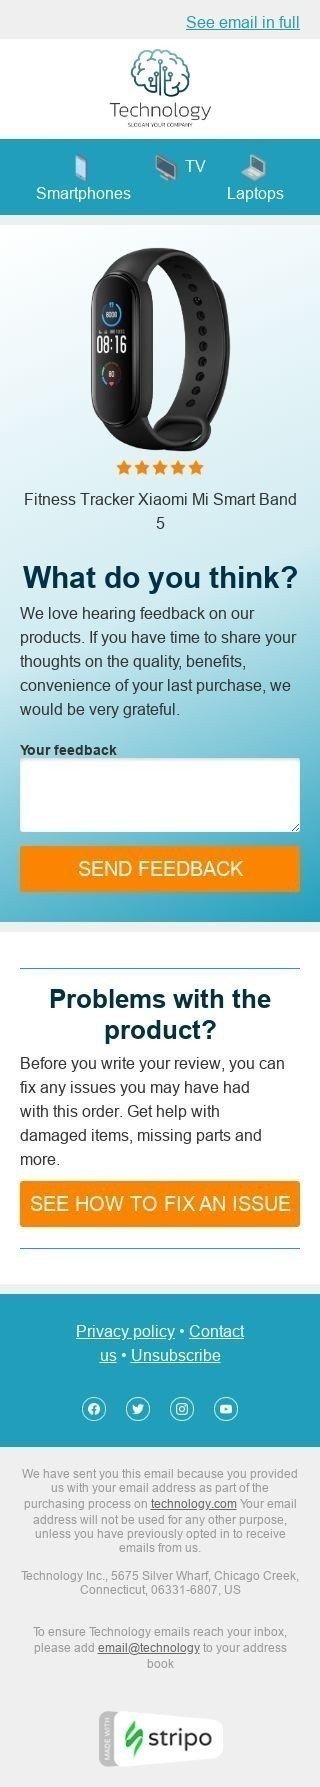 Retargeting Email Template «Purchase feedback» for Gadgets industry mobile view